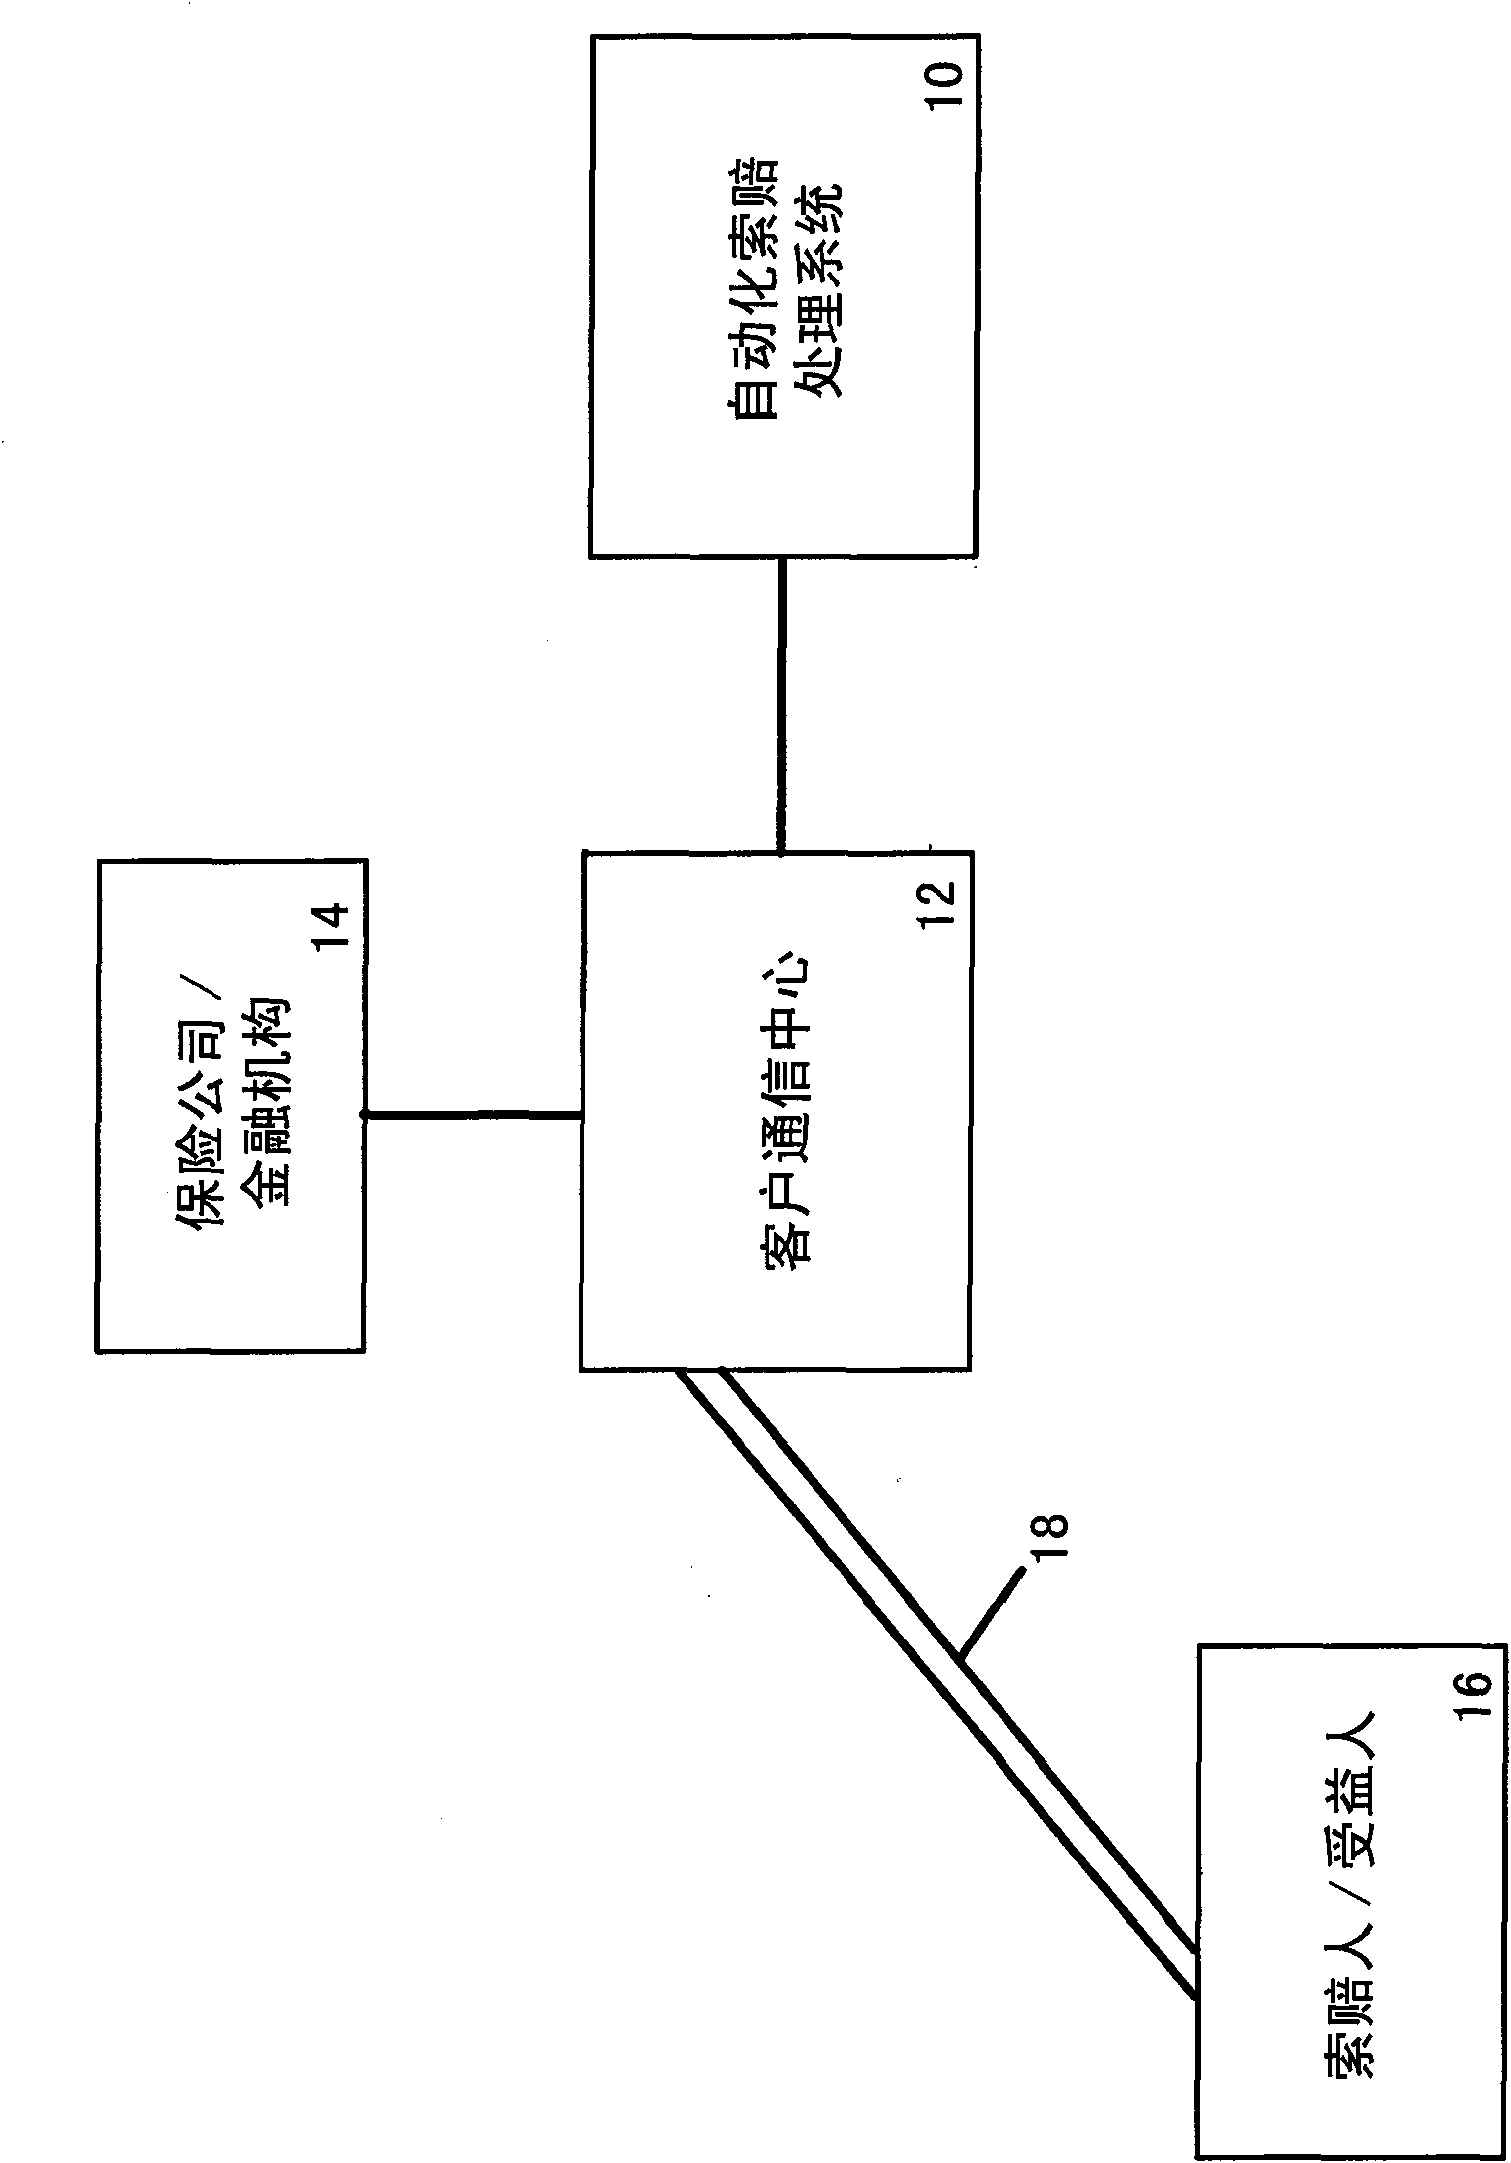 Automated claims processing system